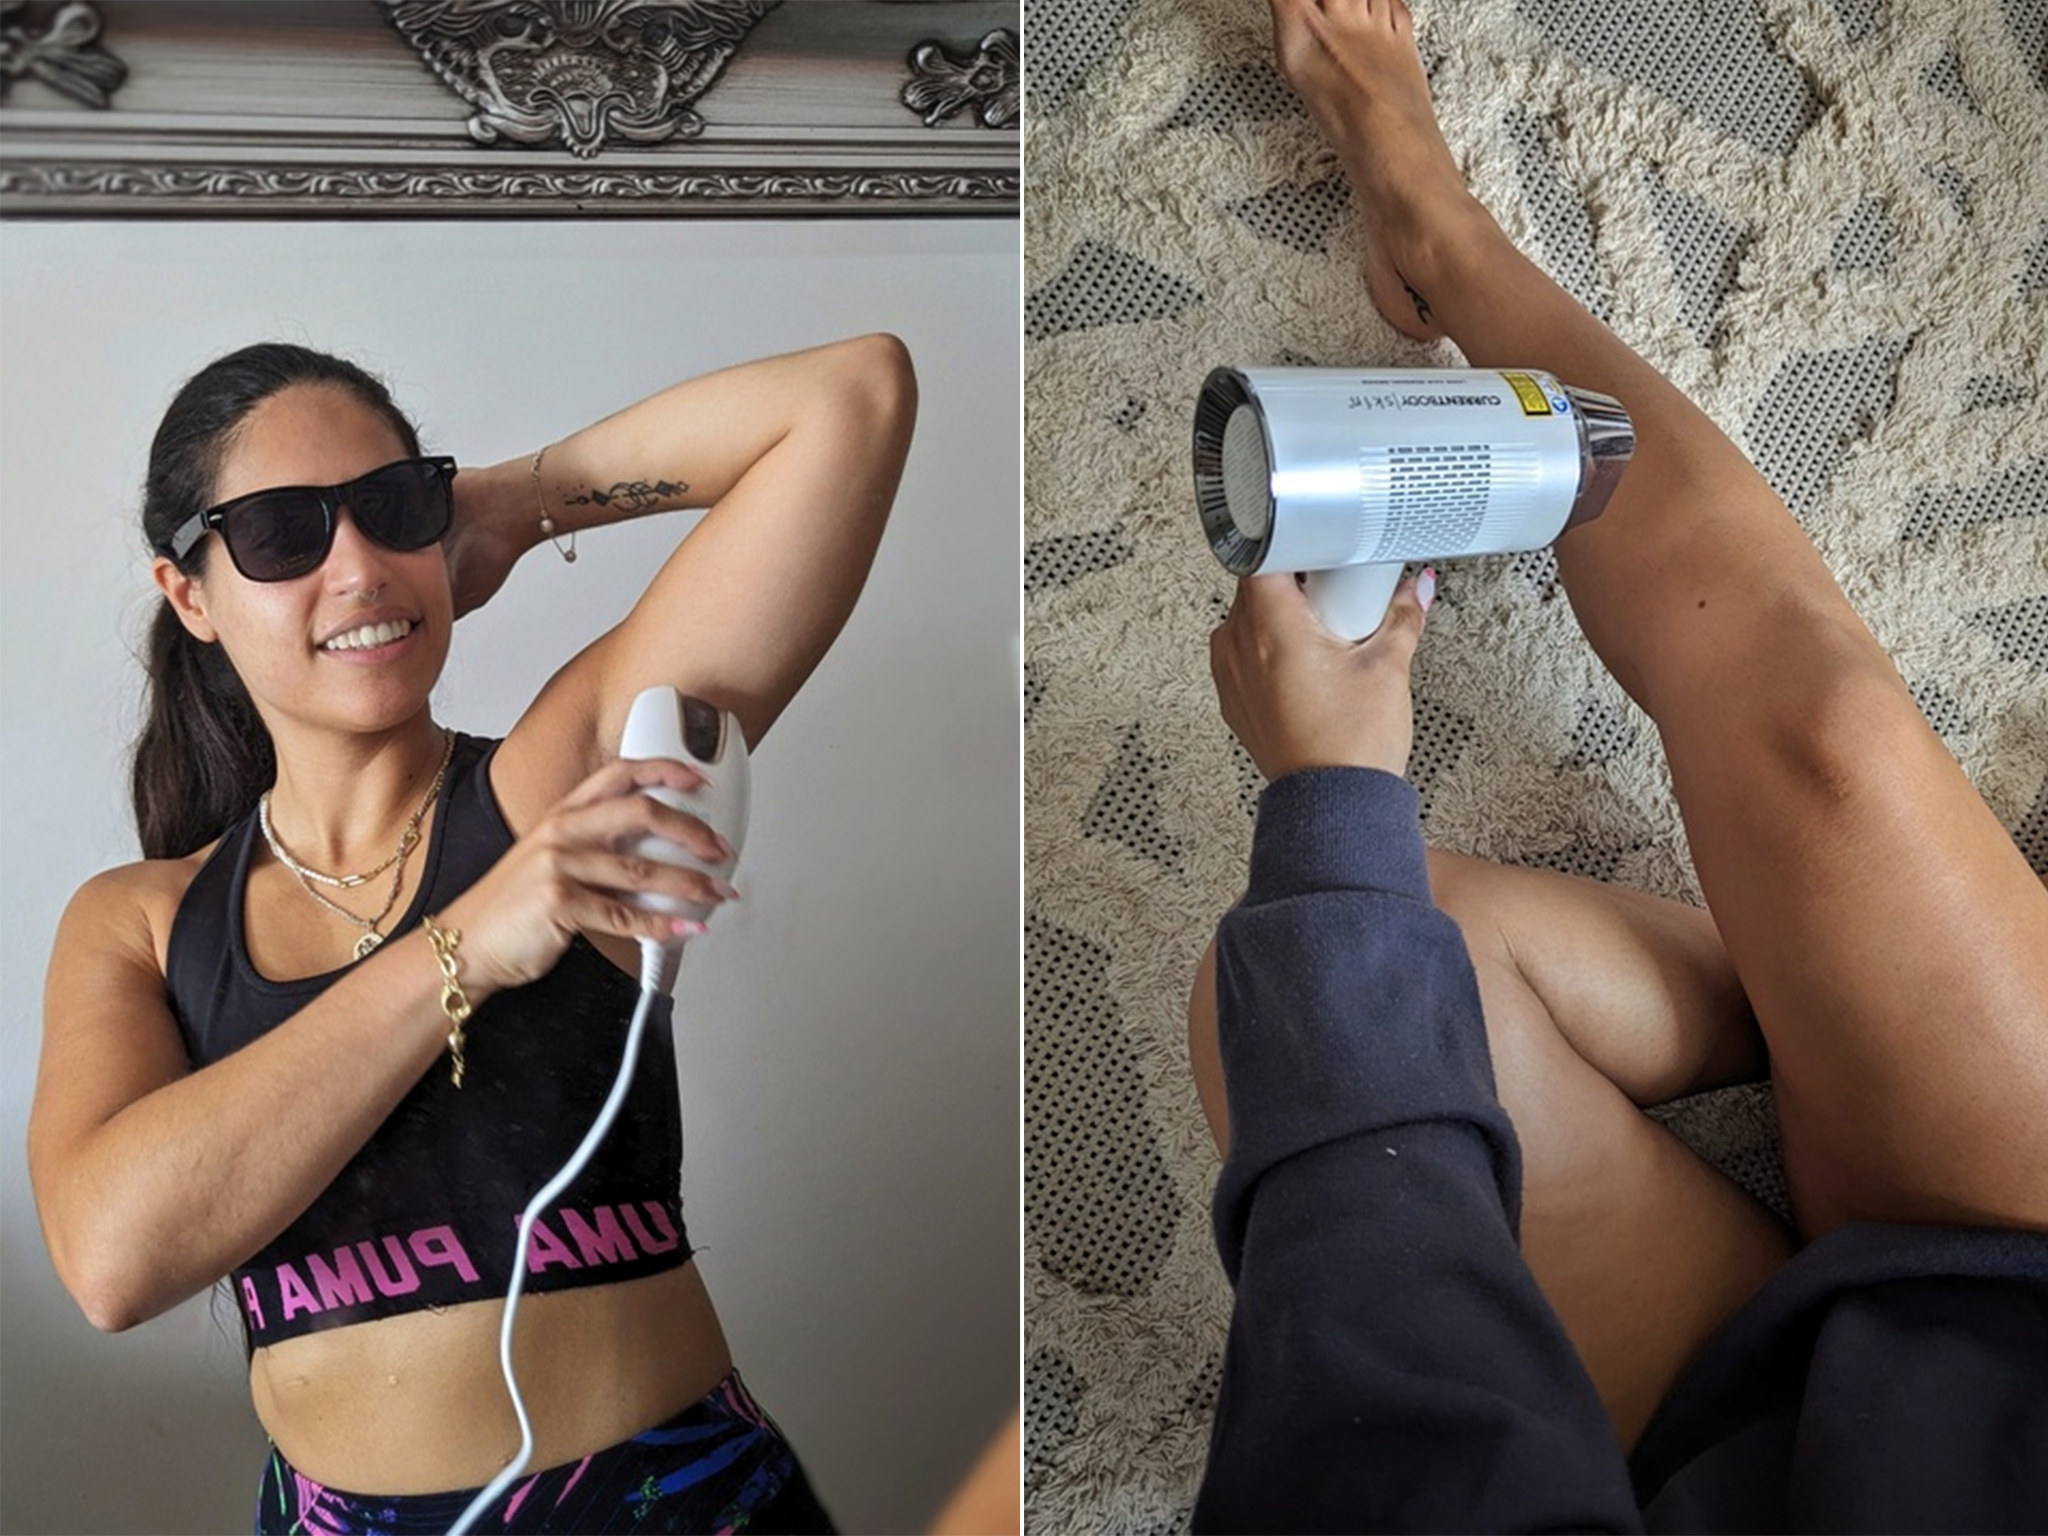 Our tester in action with the laser hair removal devices